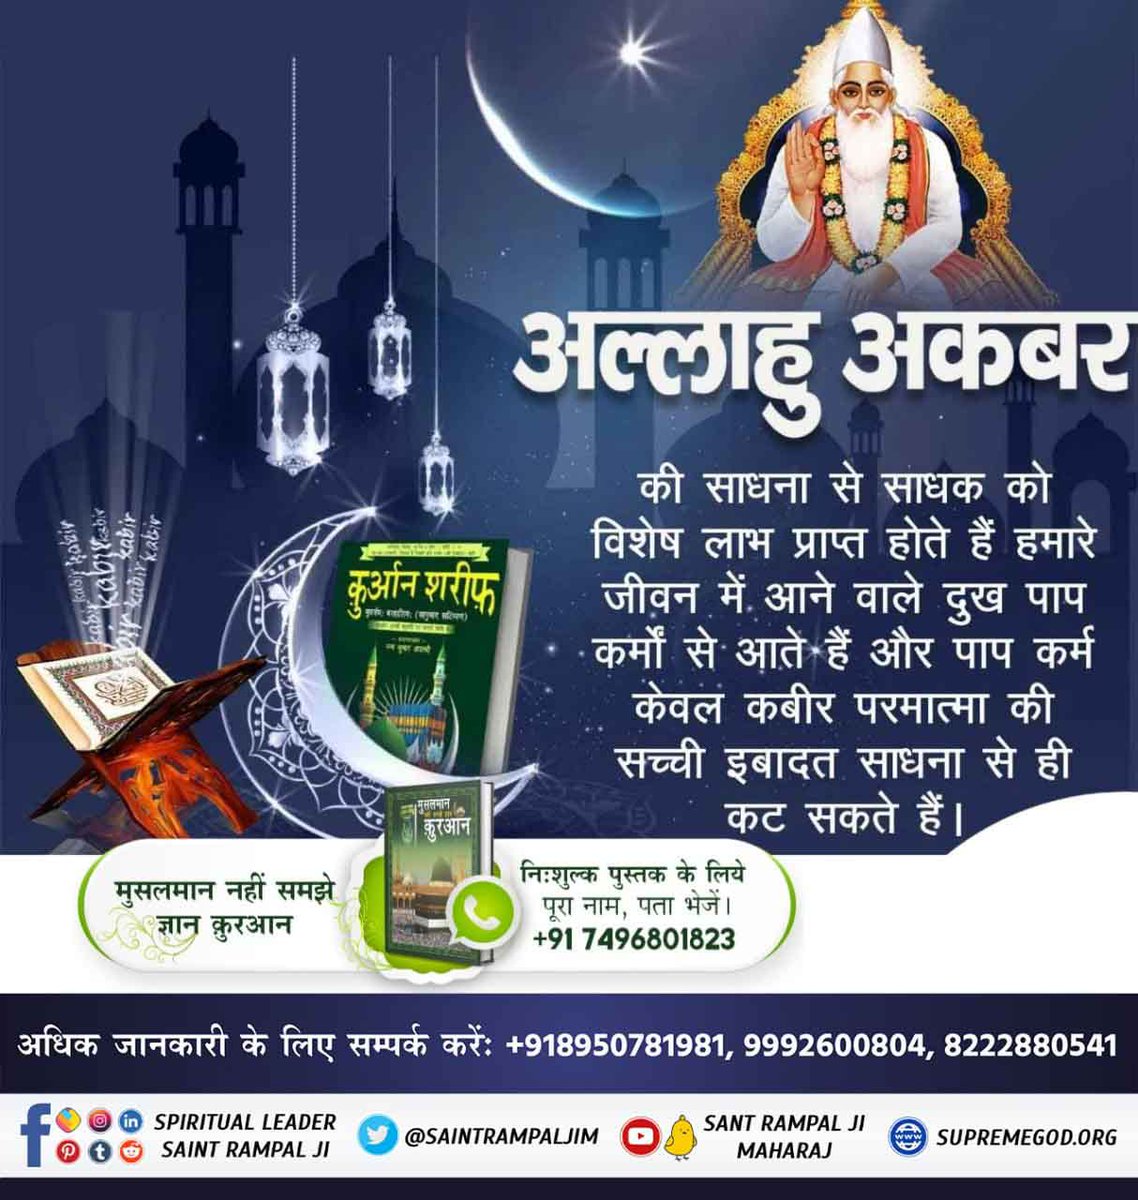 #TheLifeOfProphetMuhammad Hazrat Muhammad never ate Meat❗ Nabi Mohammed is respectable, who is called the incarnation of God. His 1.80 lakh followers never consumed meat. Allah Kabir